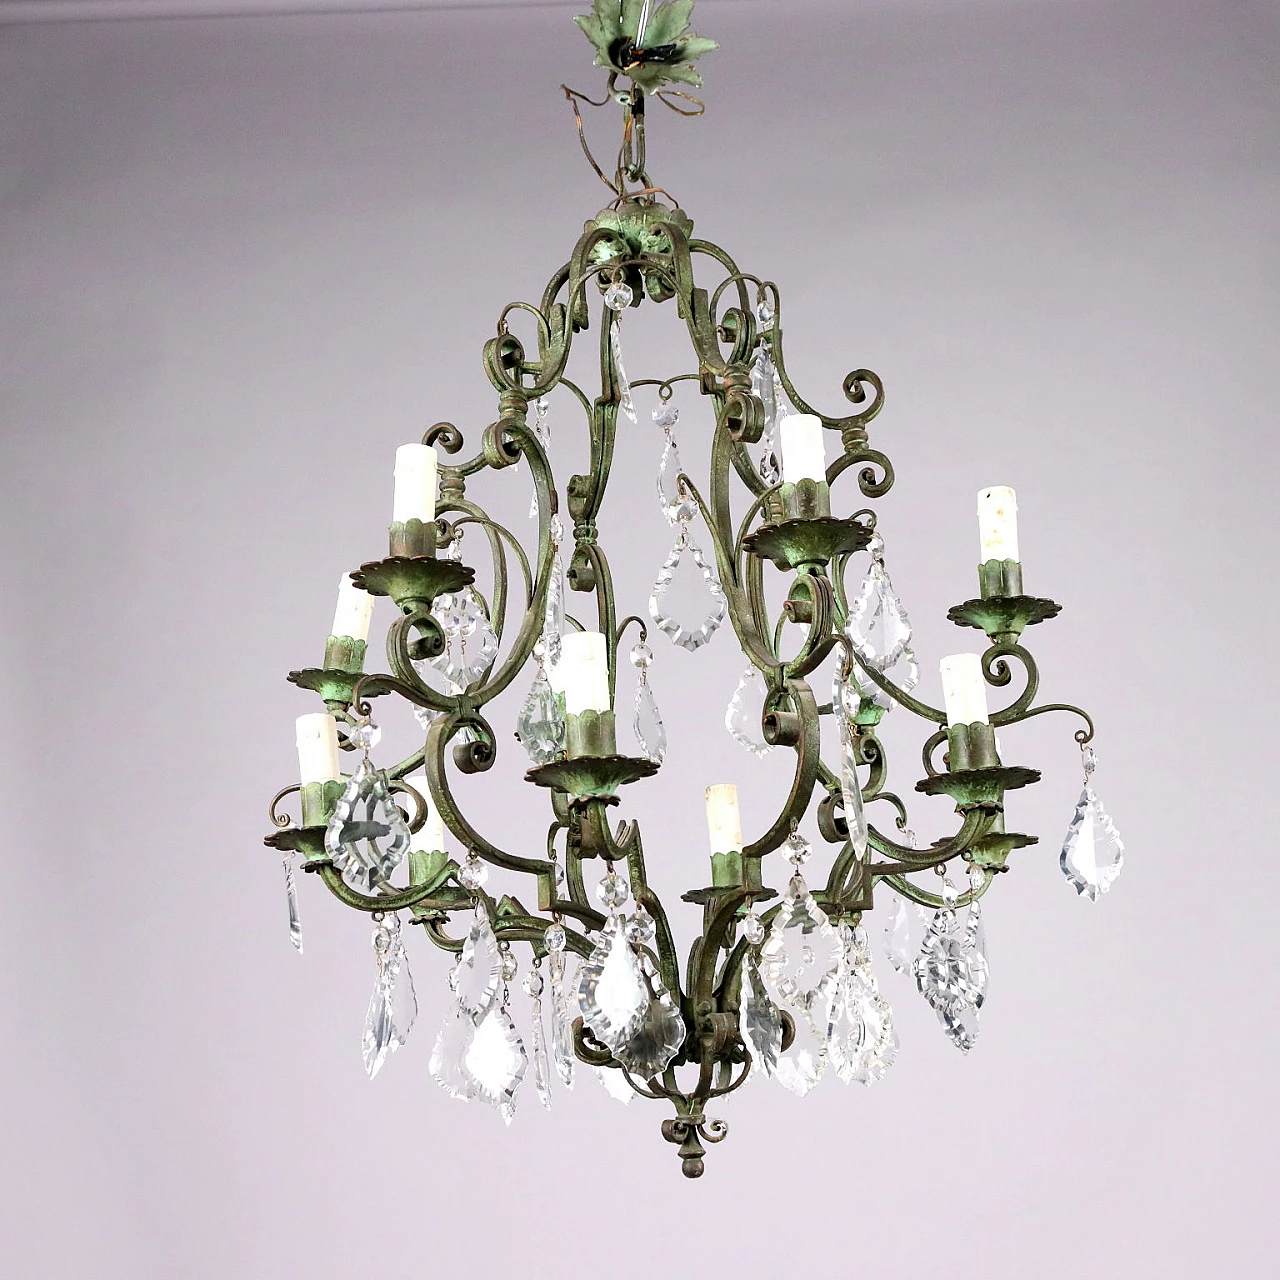 12-Light wrought iron chandelier and glass pendants 7